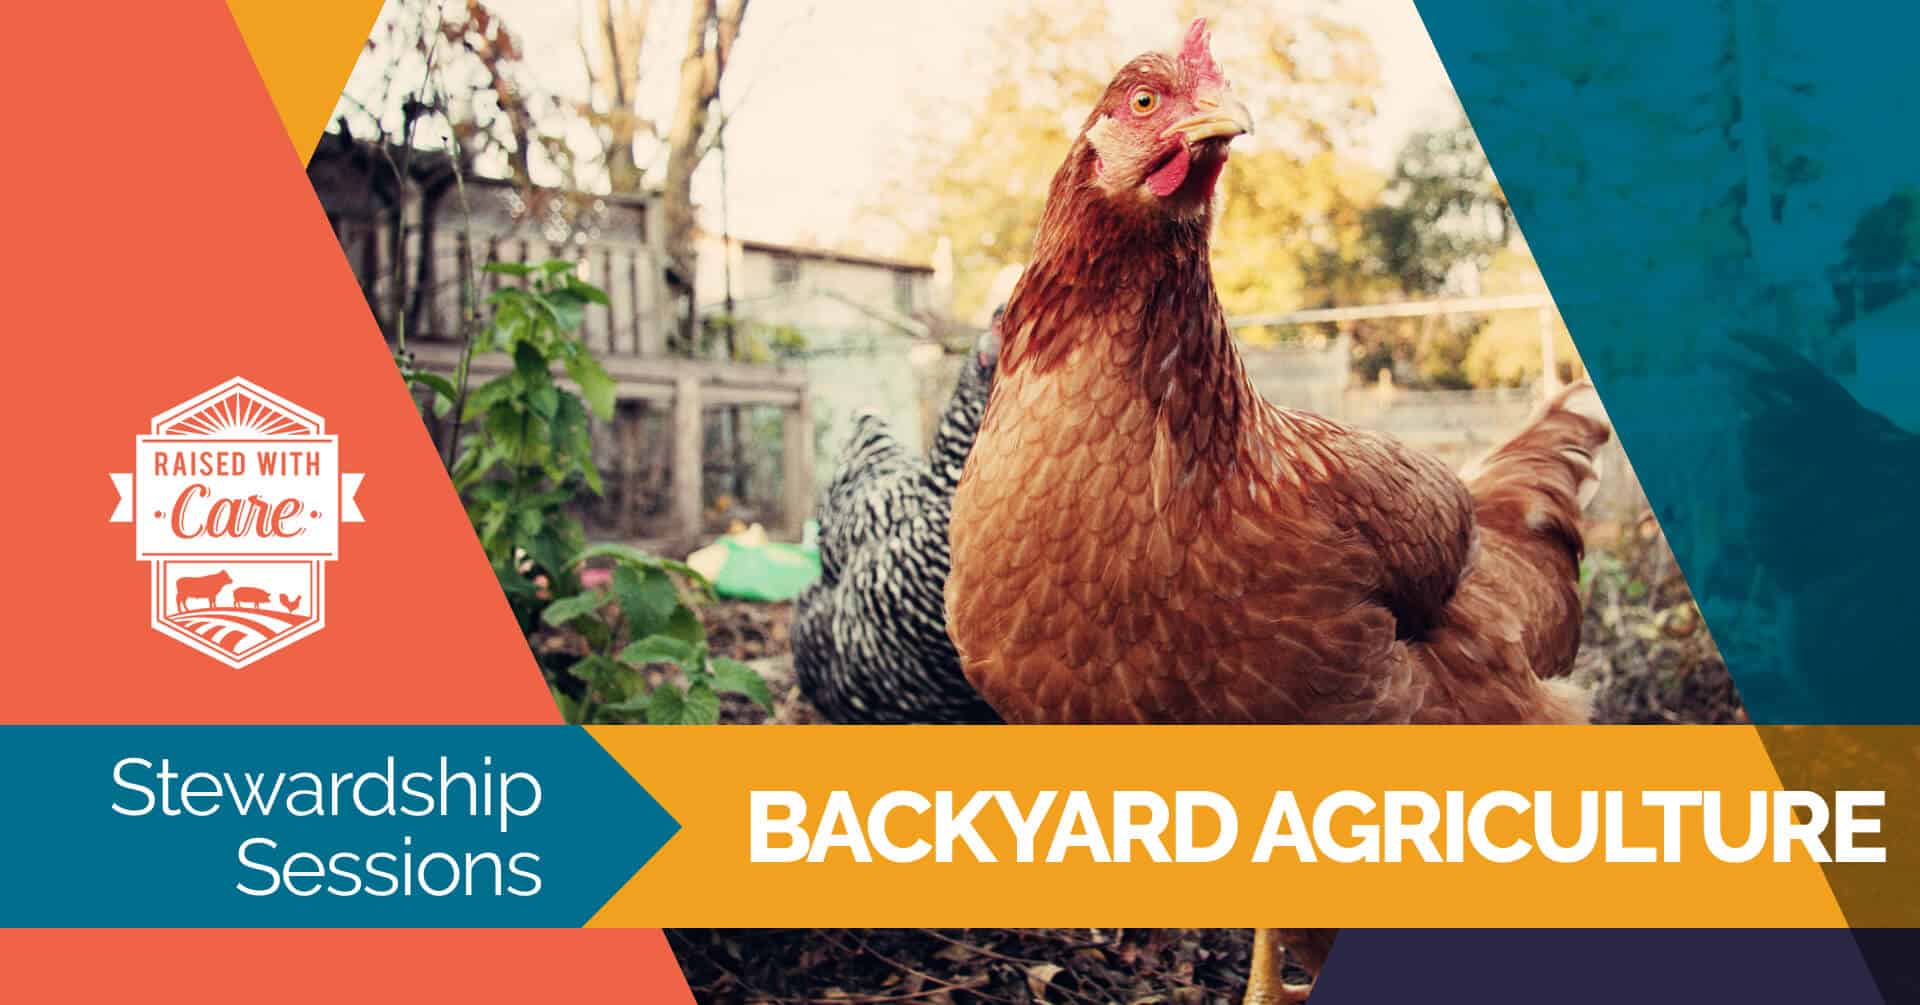 Raised With Care: Stewardship Sessions Backyard Agriculture